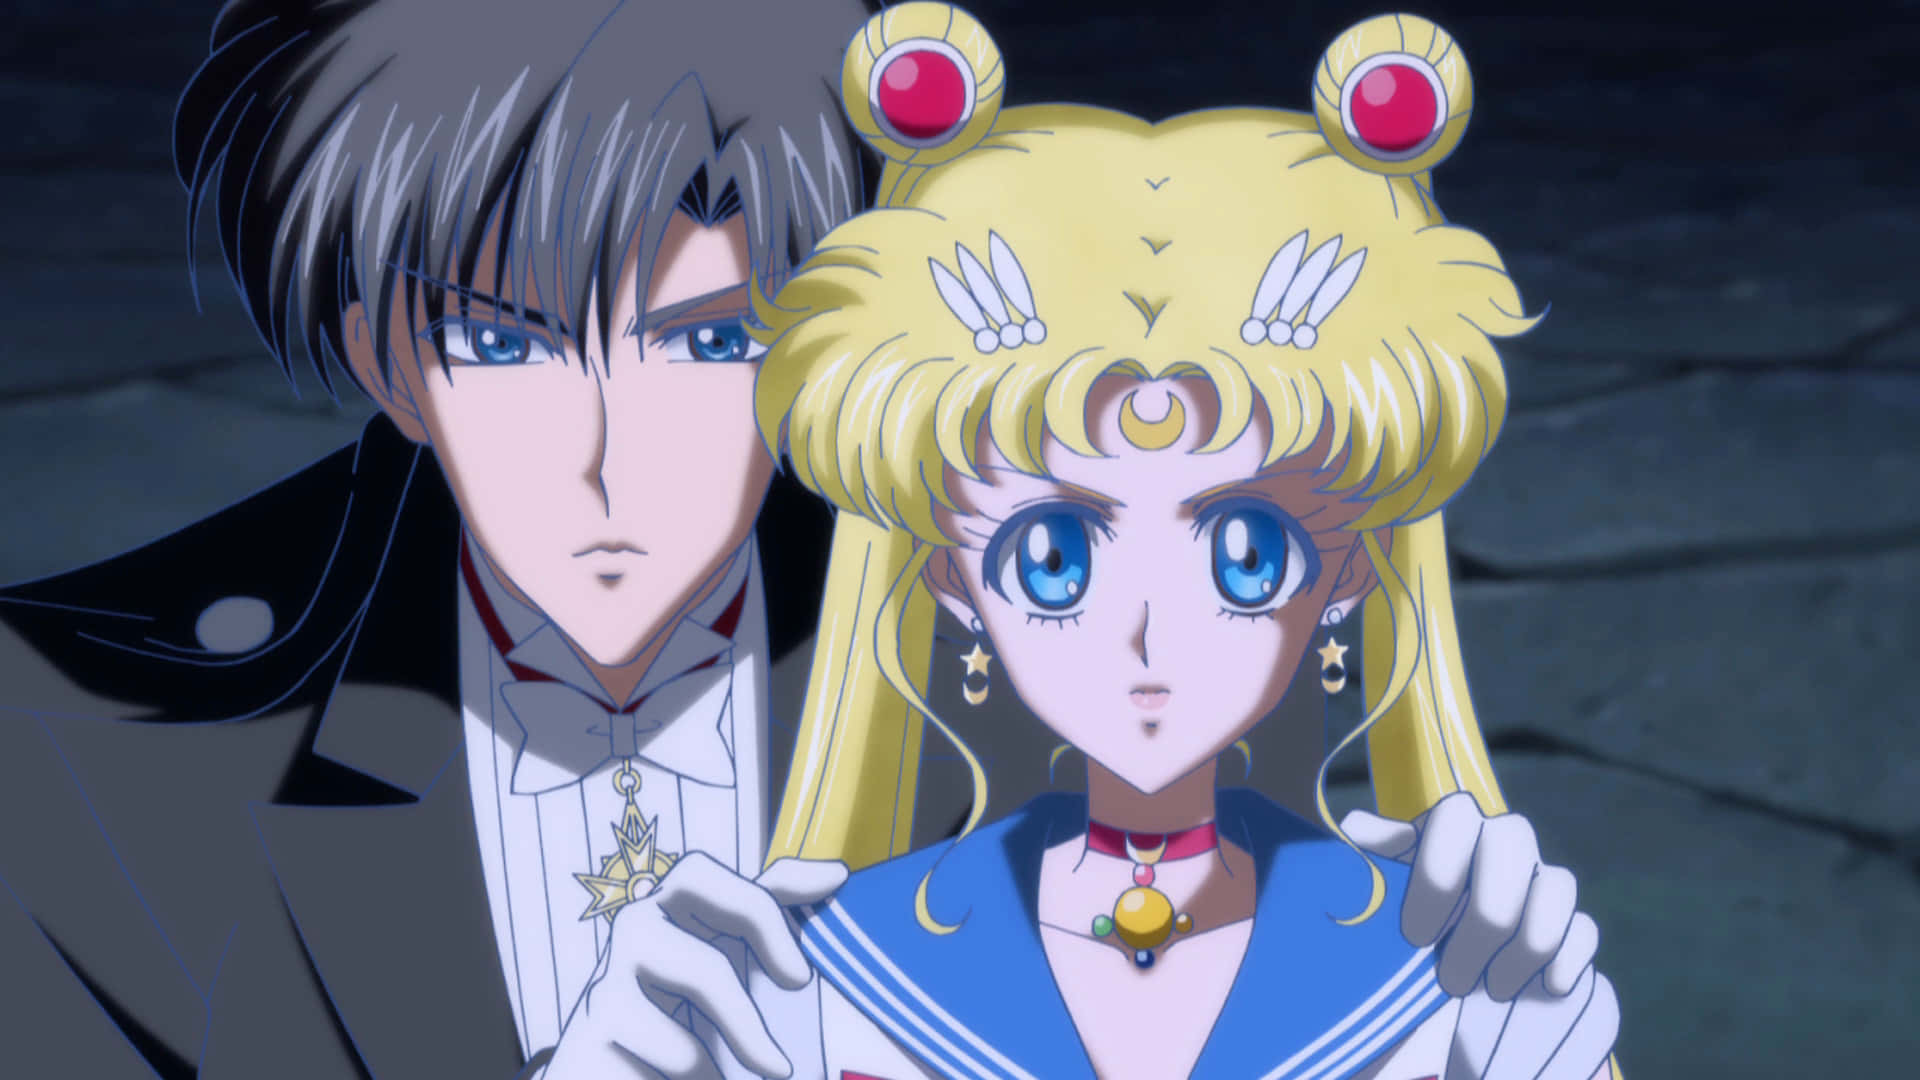 Tuxedo Mask, The Dashing And Heroic Defender Of The Innocent Wallpaper